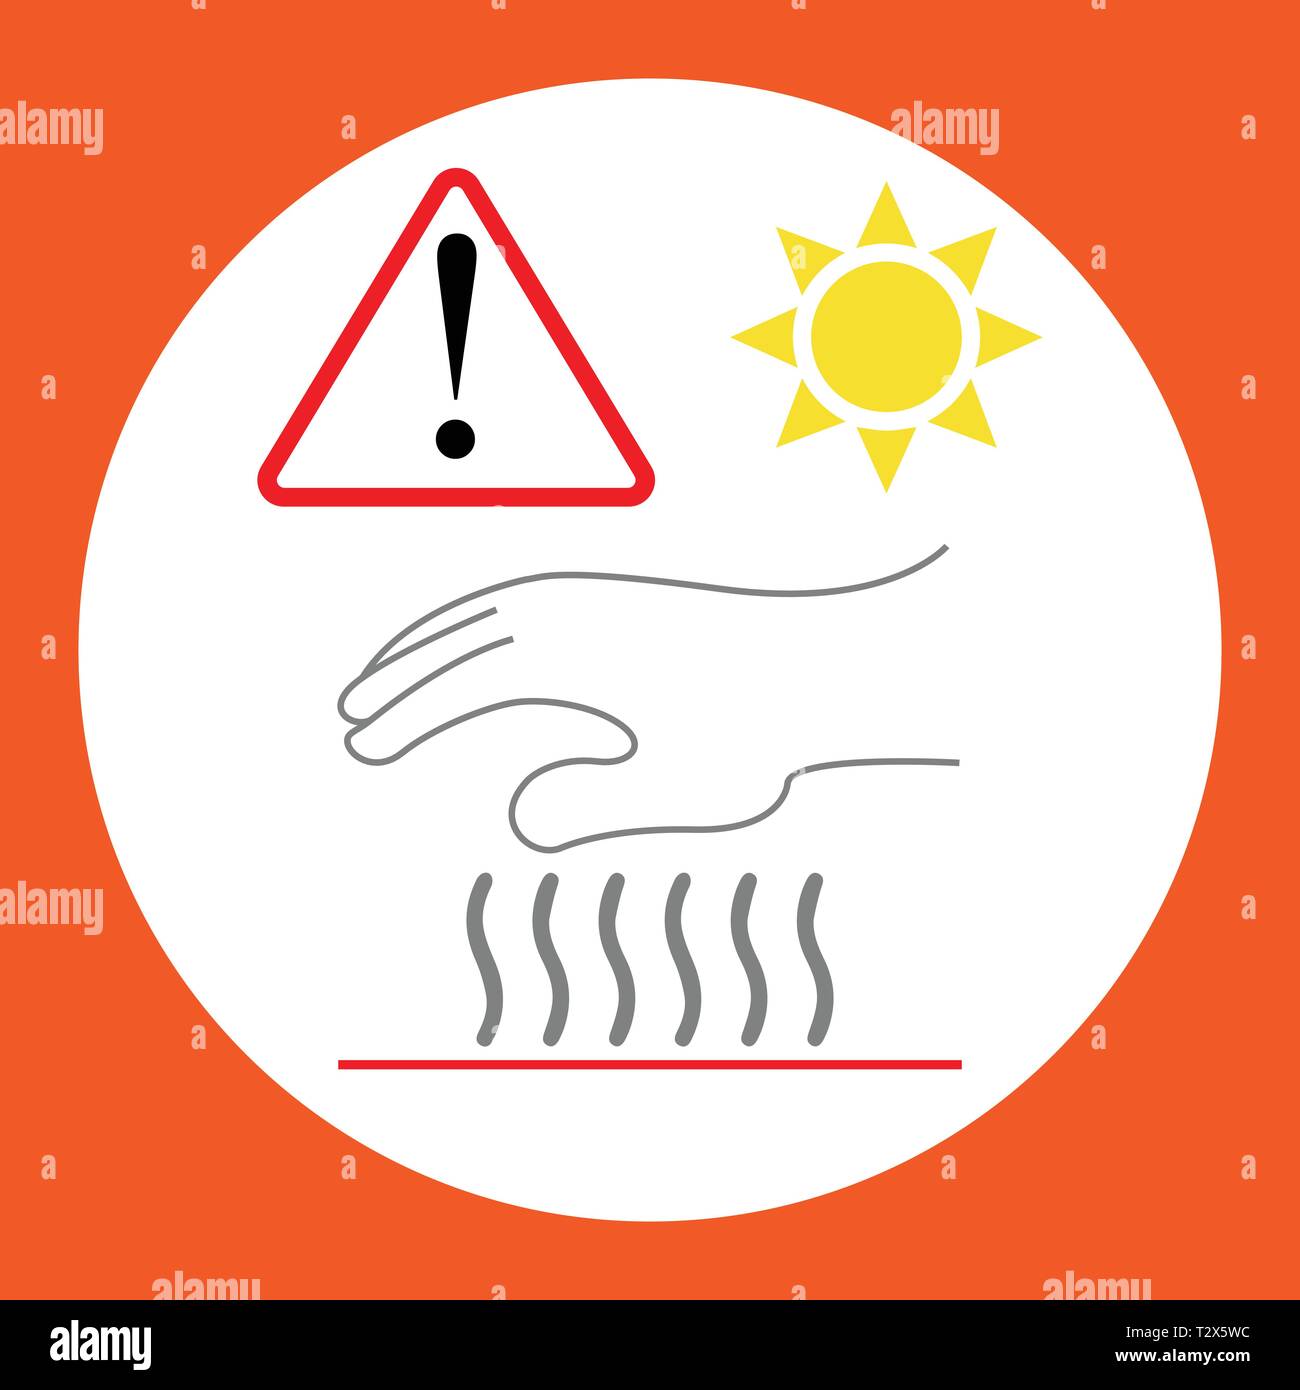 Hot surface symbol with hand and sun and hazard warning attention sign with exclamation mark Stock Vector